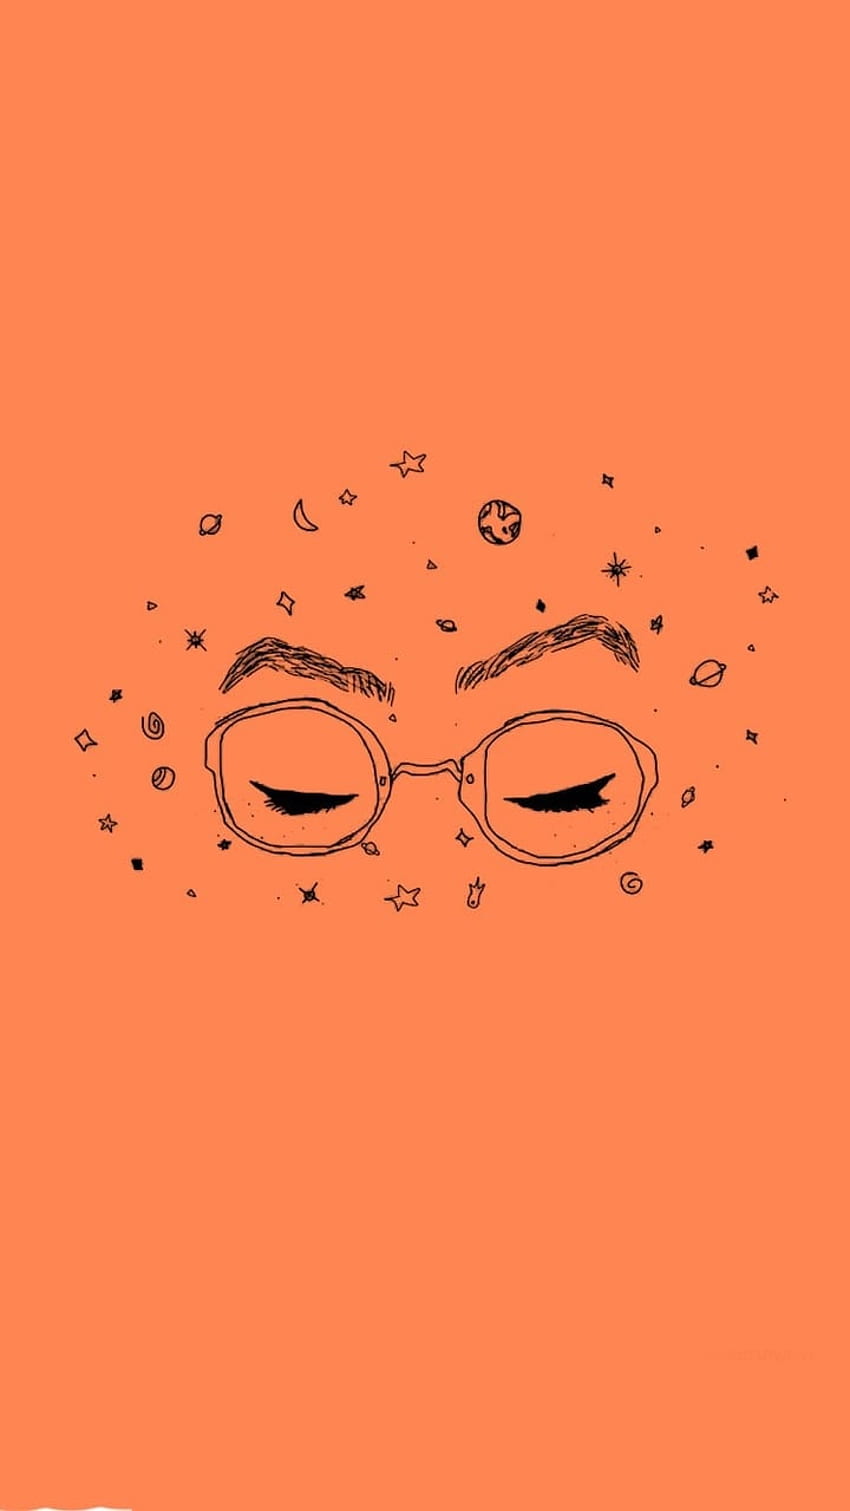 An illustration of a pair of glasses with a person's eyes closed - Orange